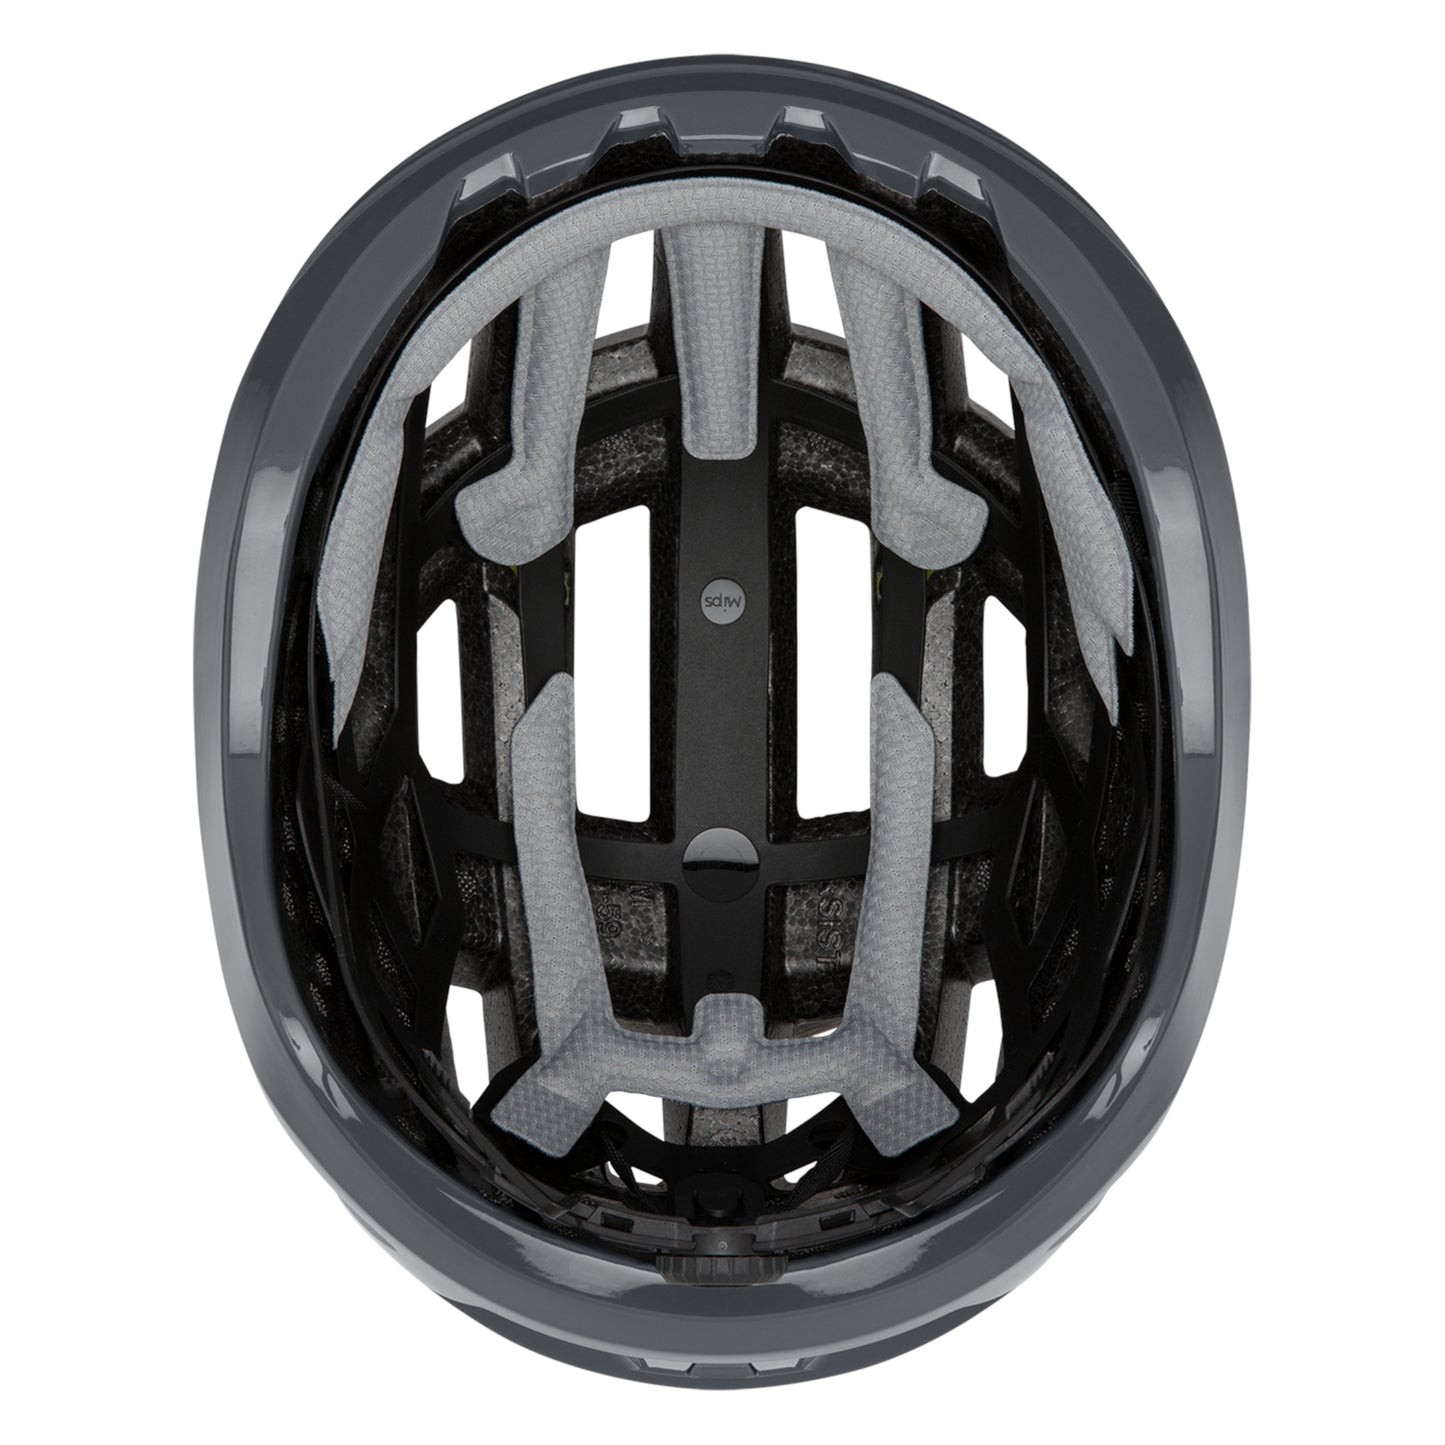 Smith Optics Persist MIPS Road Helmet Black Cement inside view on Fly Rides.